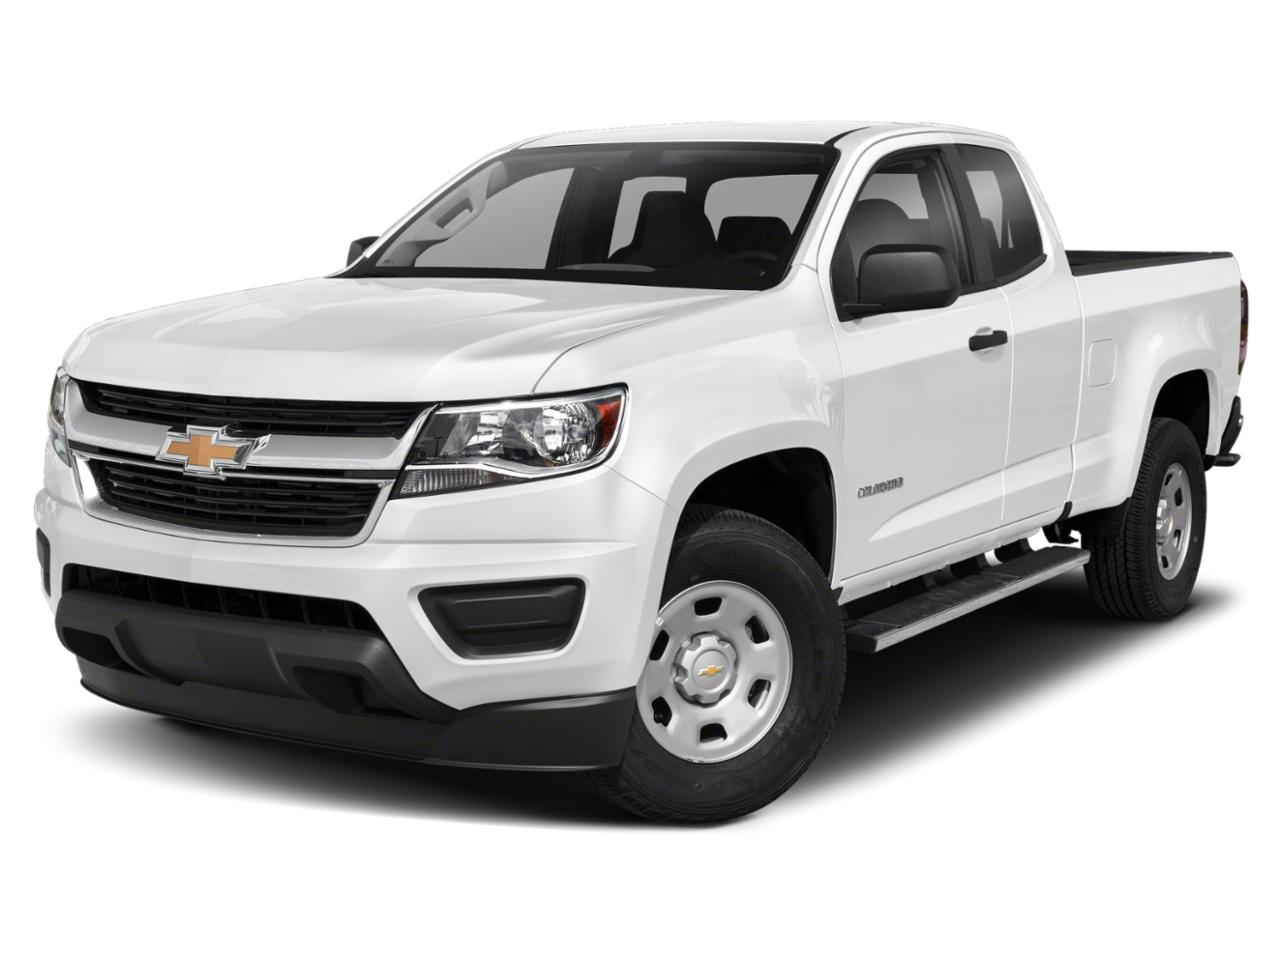 2020 Chevrolet Colorado Vehicle Photo in Saint Charles, IL 60174